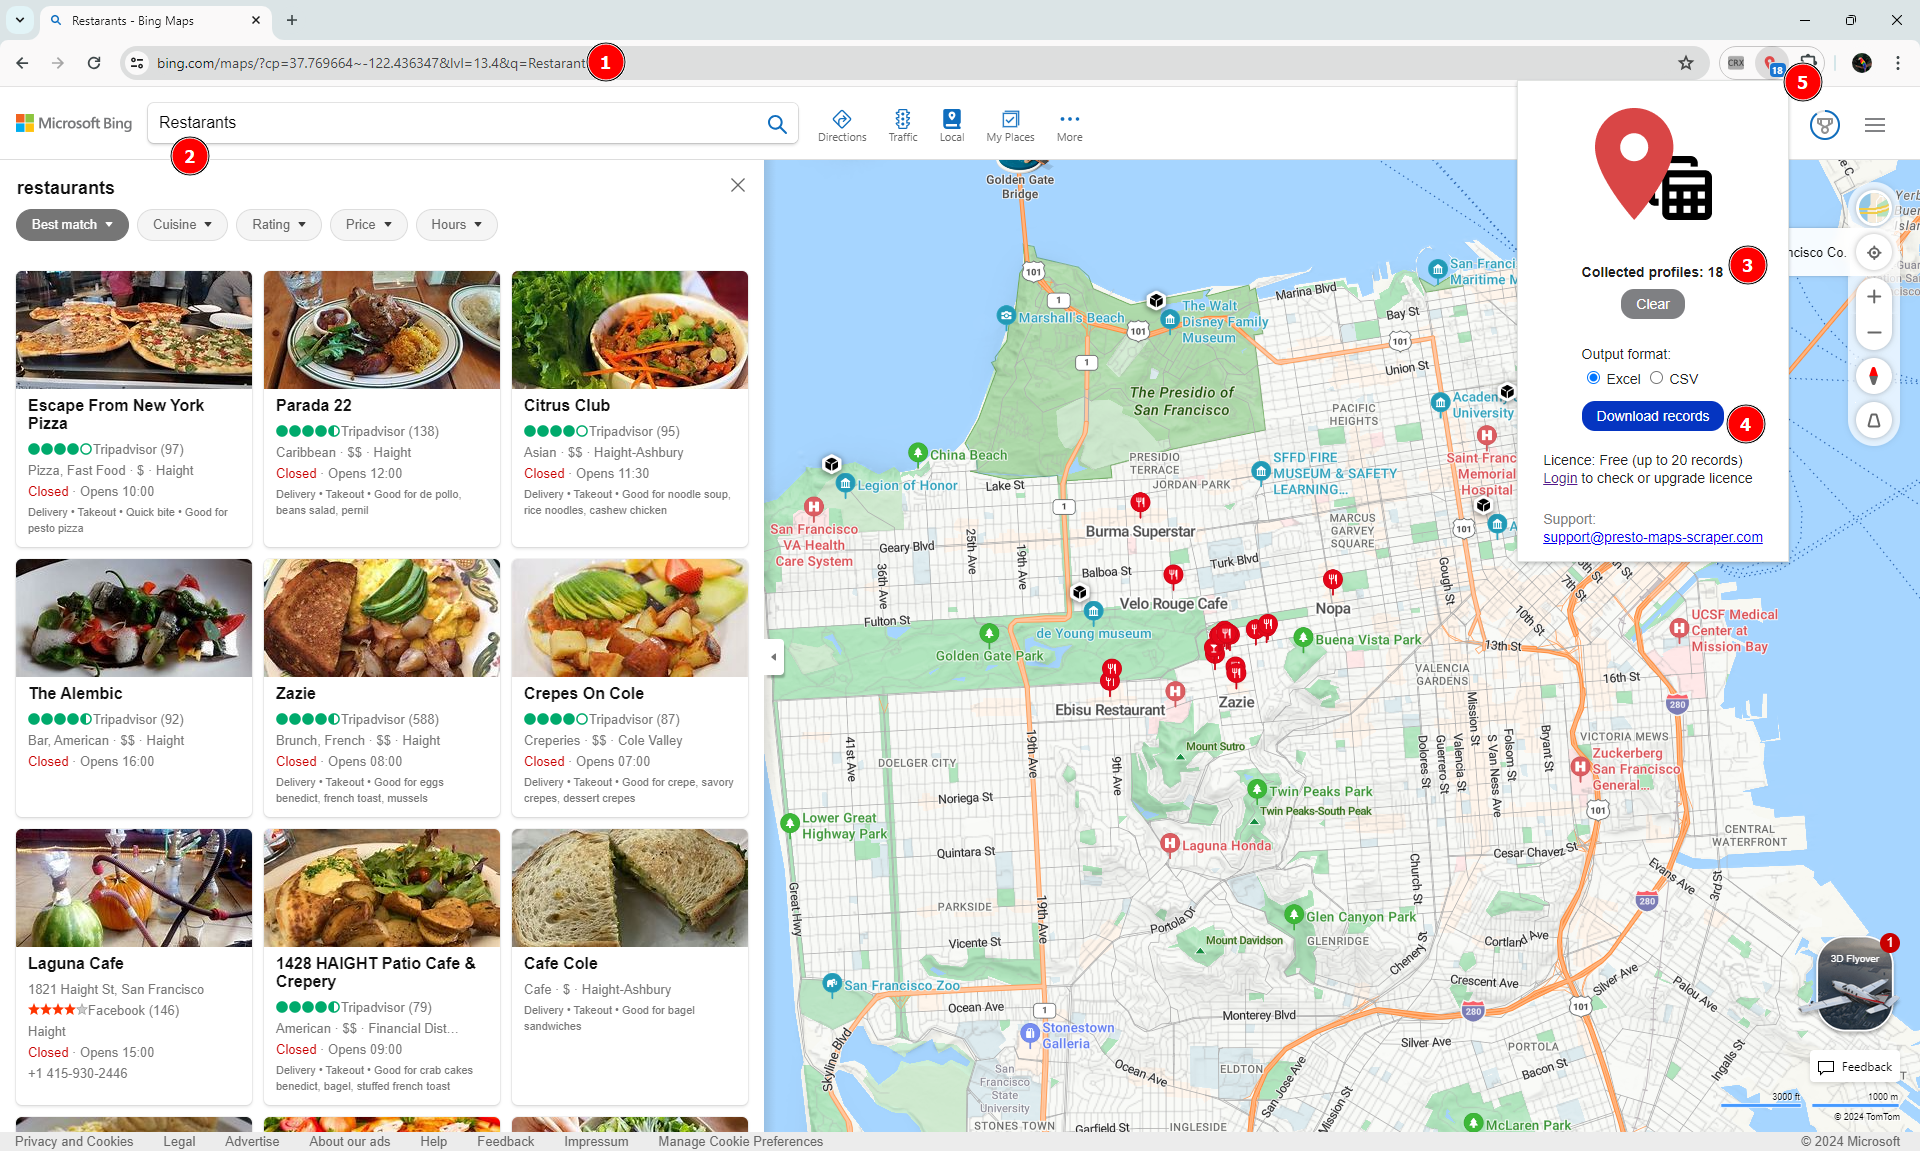 Scraping Business Profiles on Bing Maps